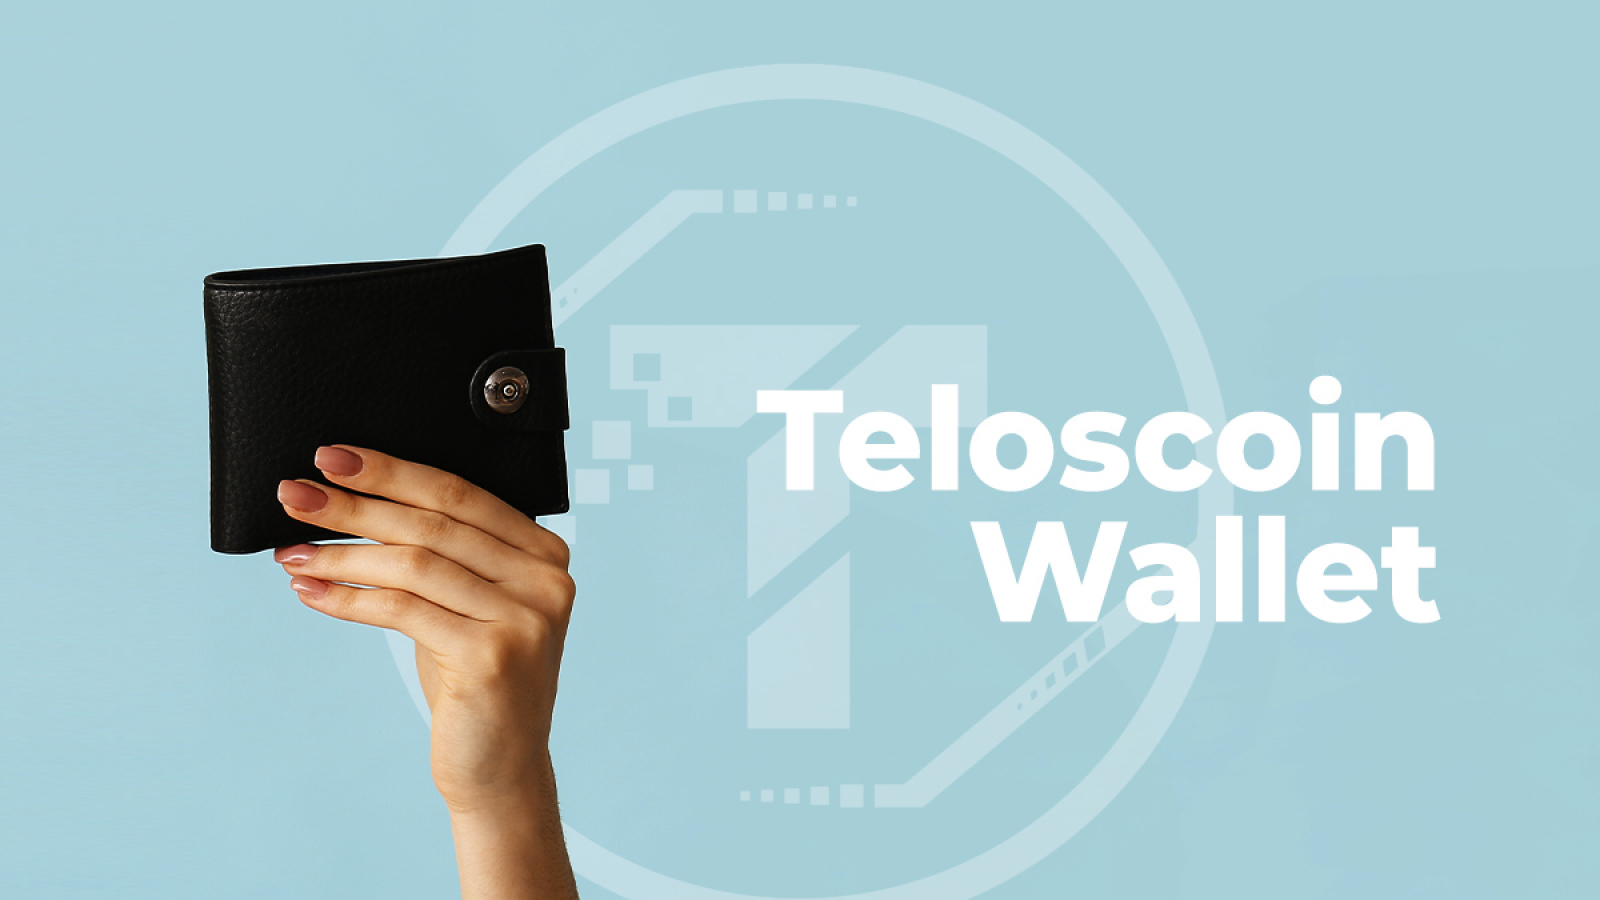 Teloscoin To Launch Non-custodial Wallet Enabling Users To Buy, Hold and Sell Cryptocurrencies